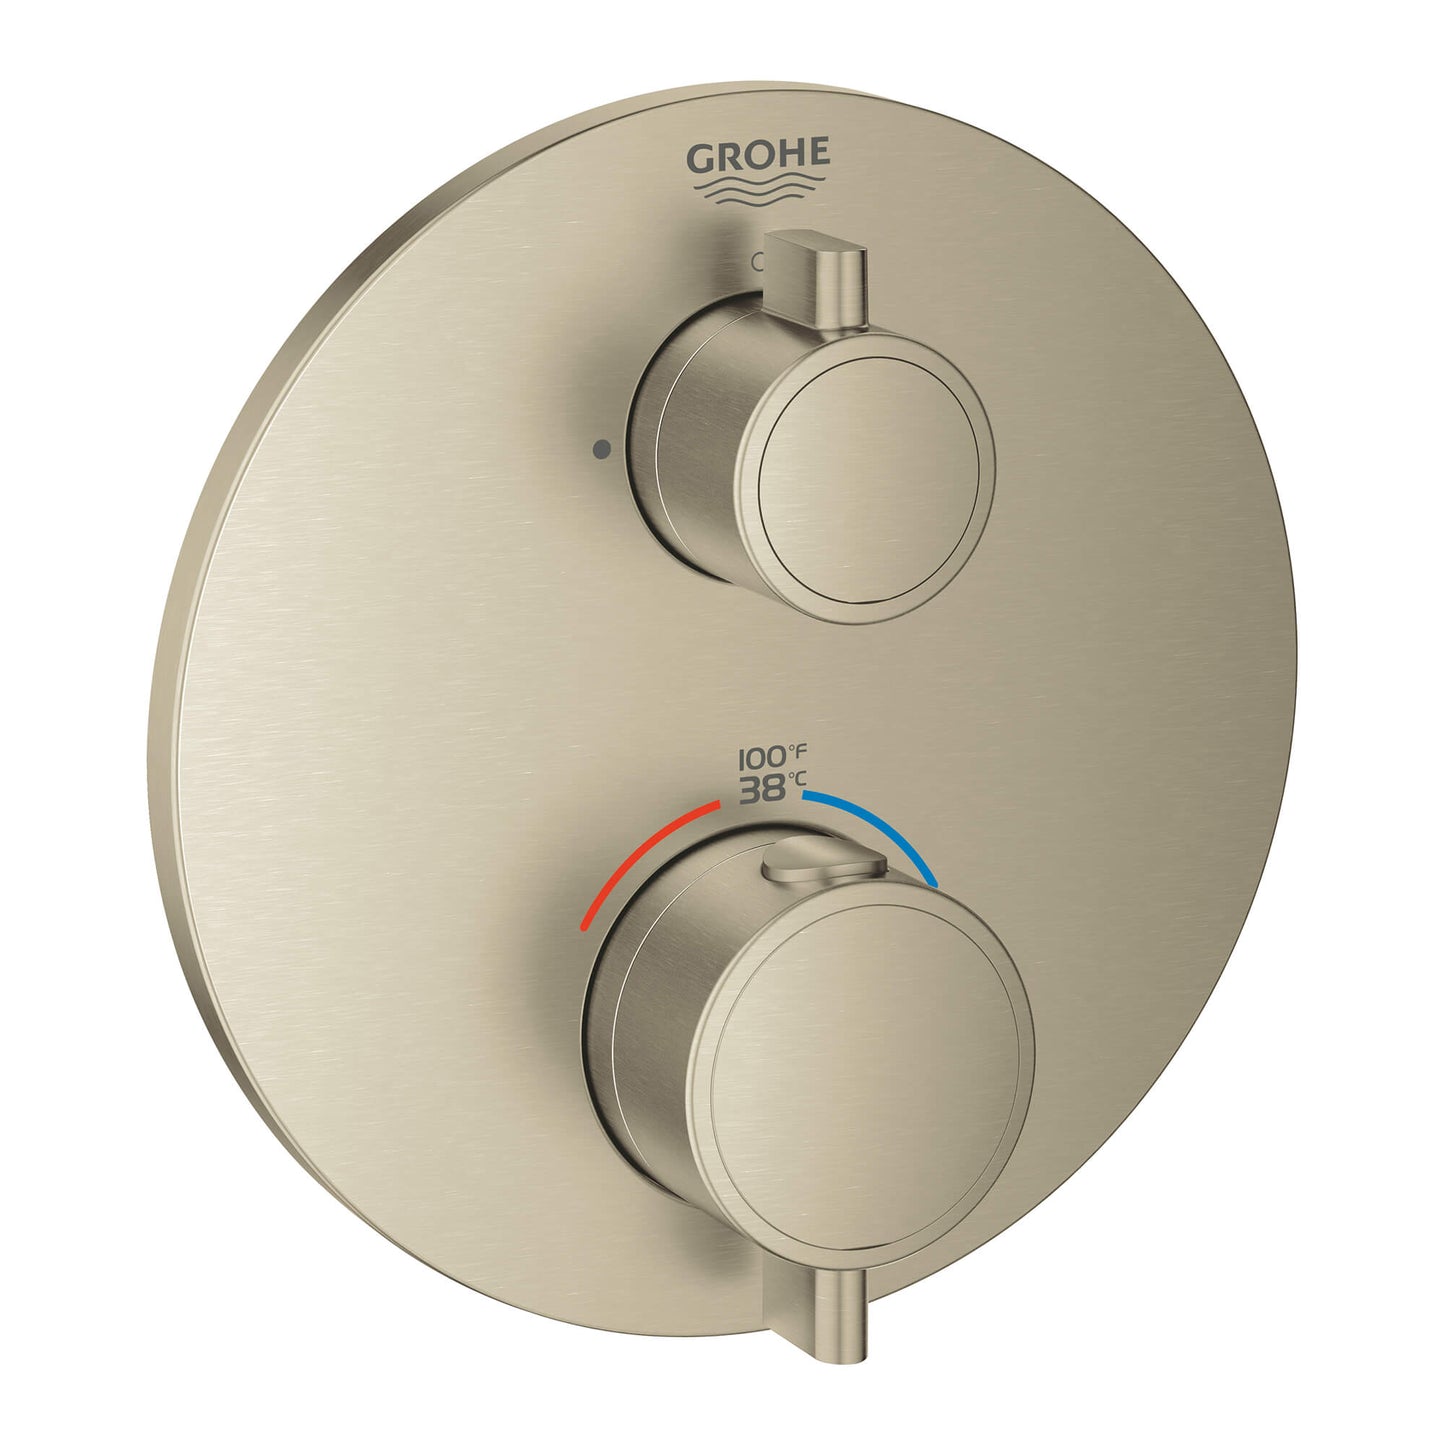 GROHE 24107EN0 Grohtherm Brushed Nickel Single Function 2-Handle Thermostatic Valve Trim